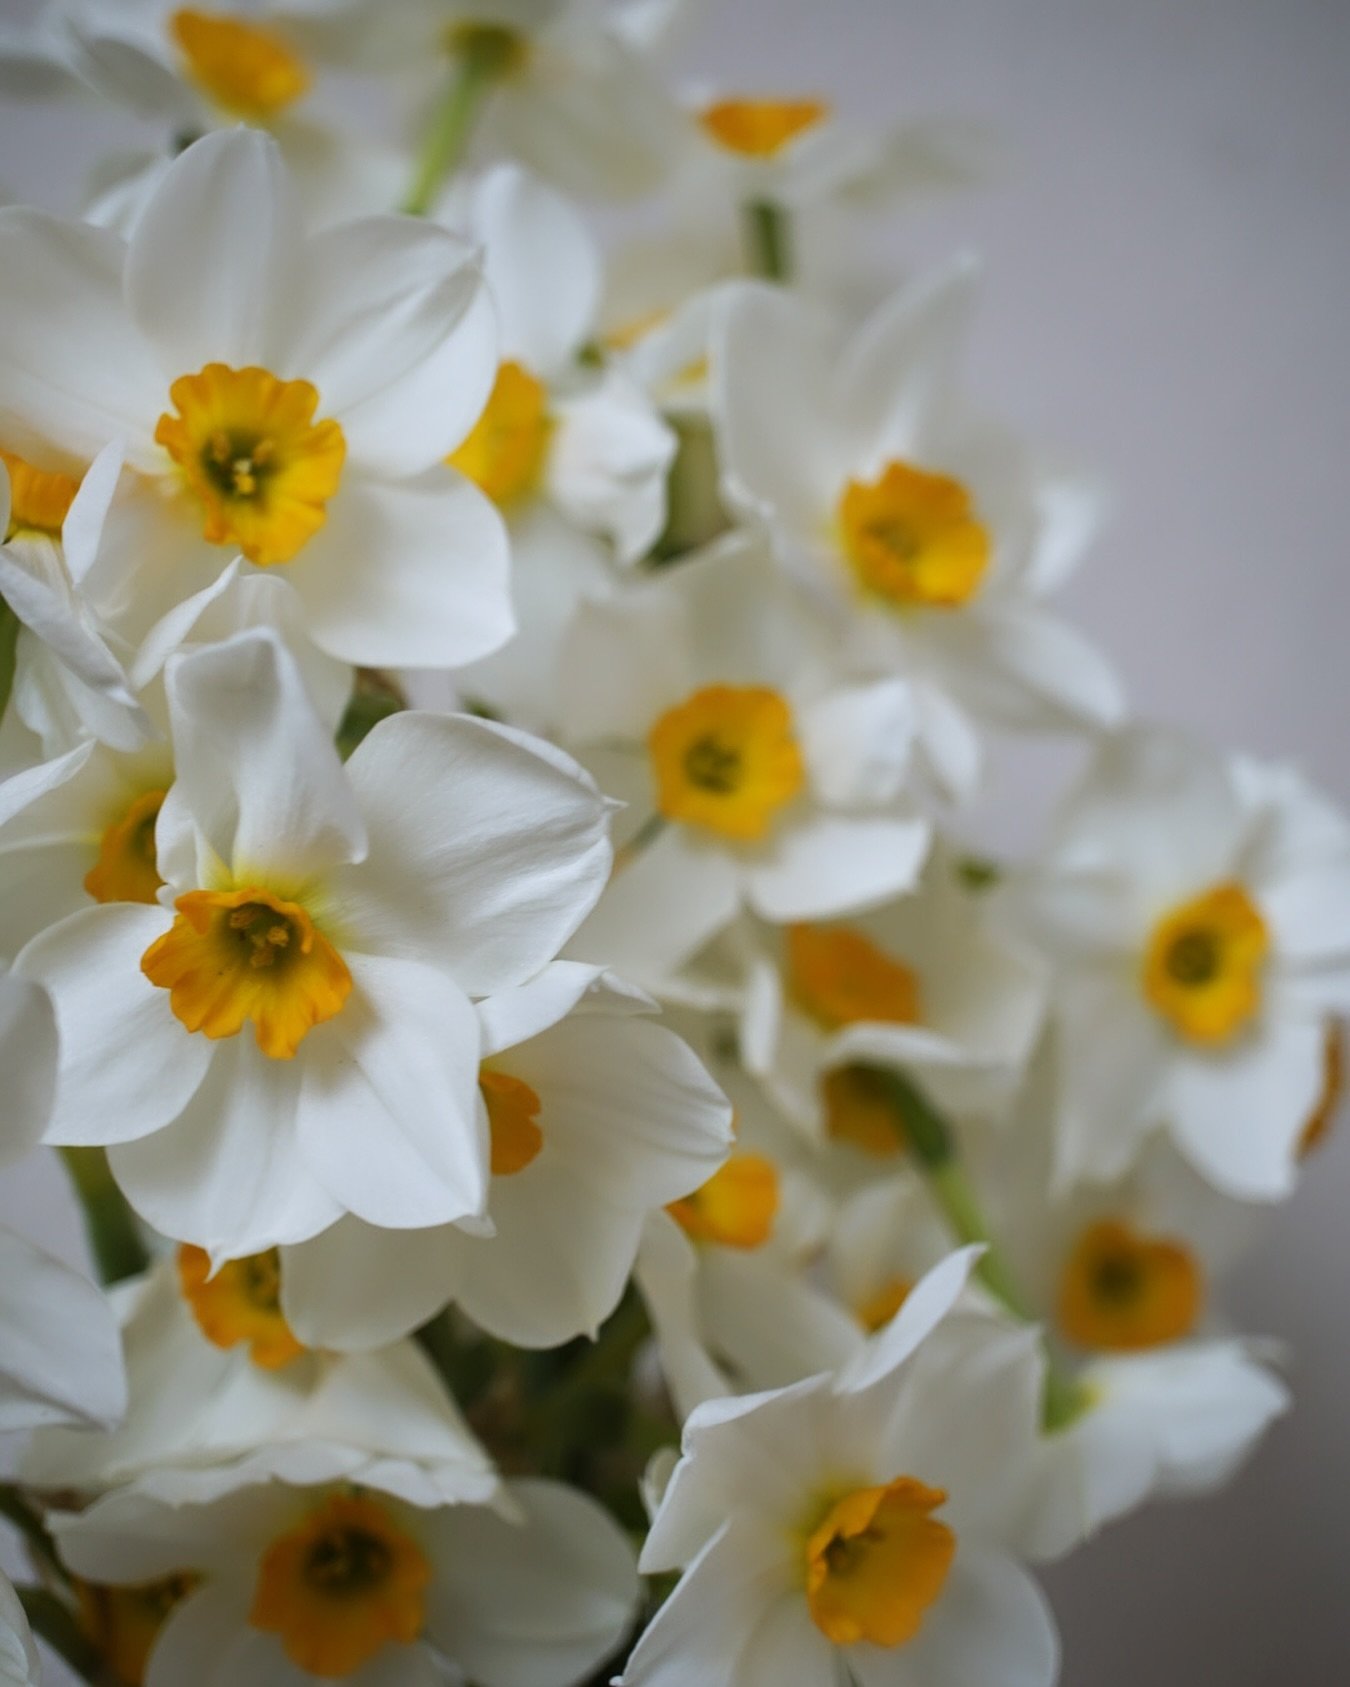 Daff Friday feels! We harvested the last of our heirloom daffodils today. These here are Barrett Browning and holy moly do they smell amazing! 🤩 you can find them in any of our mixed bouquets at @cafedella @thewyldebeet or @kraaysmarketgarden this w